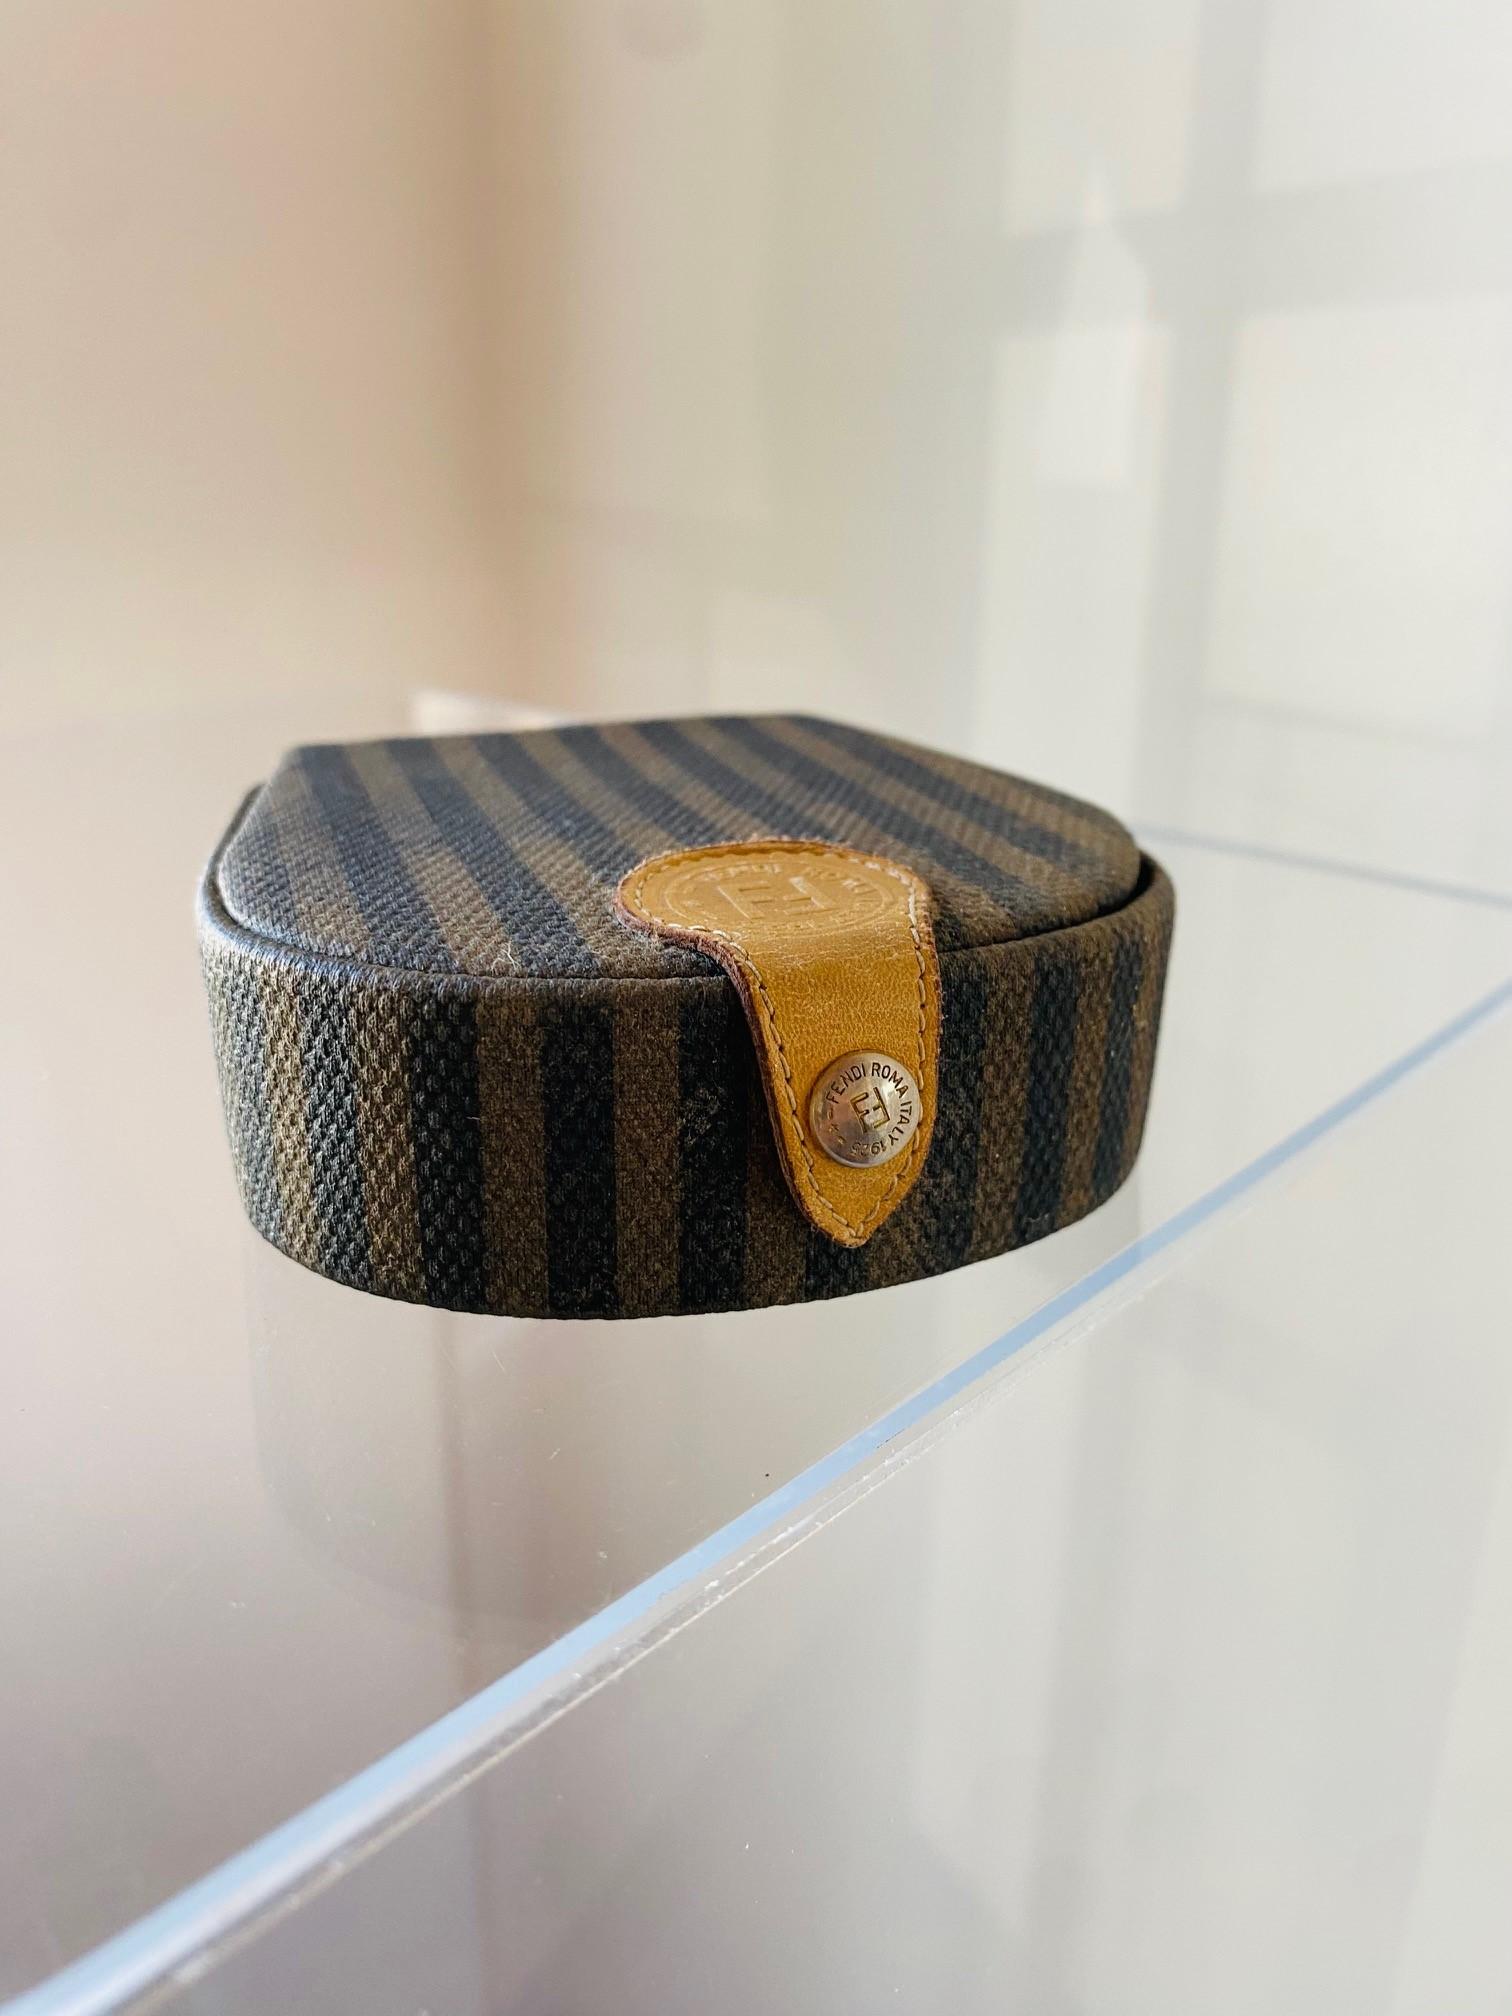 Unique and interesting trinket box by Fendi.  This vintage piece from the early 1990s is made in leather and covered in the classic Fendi Pequin stripe fabric design.  This piece opens with a snap hardware button that holds the Fendi logo to reveal